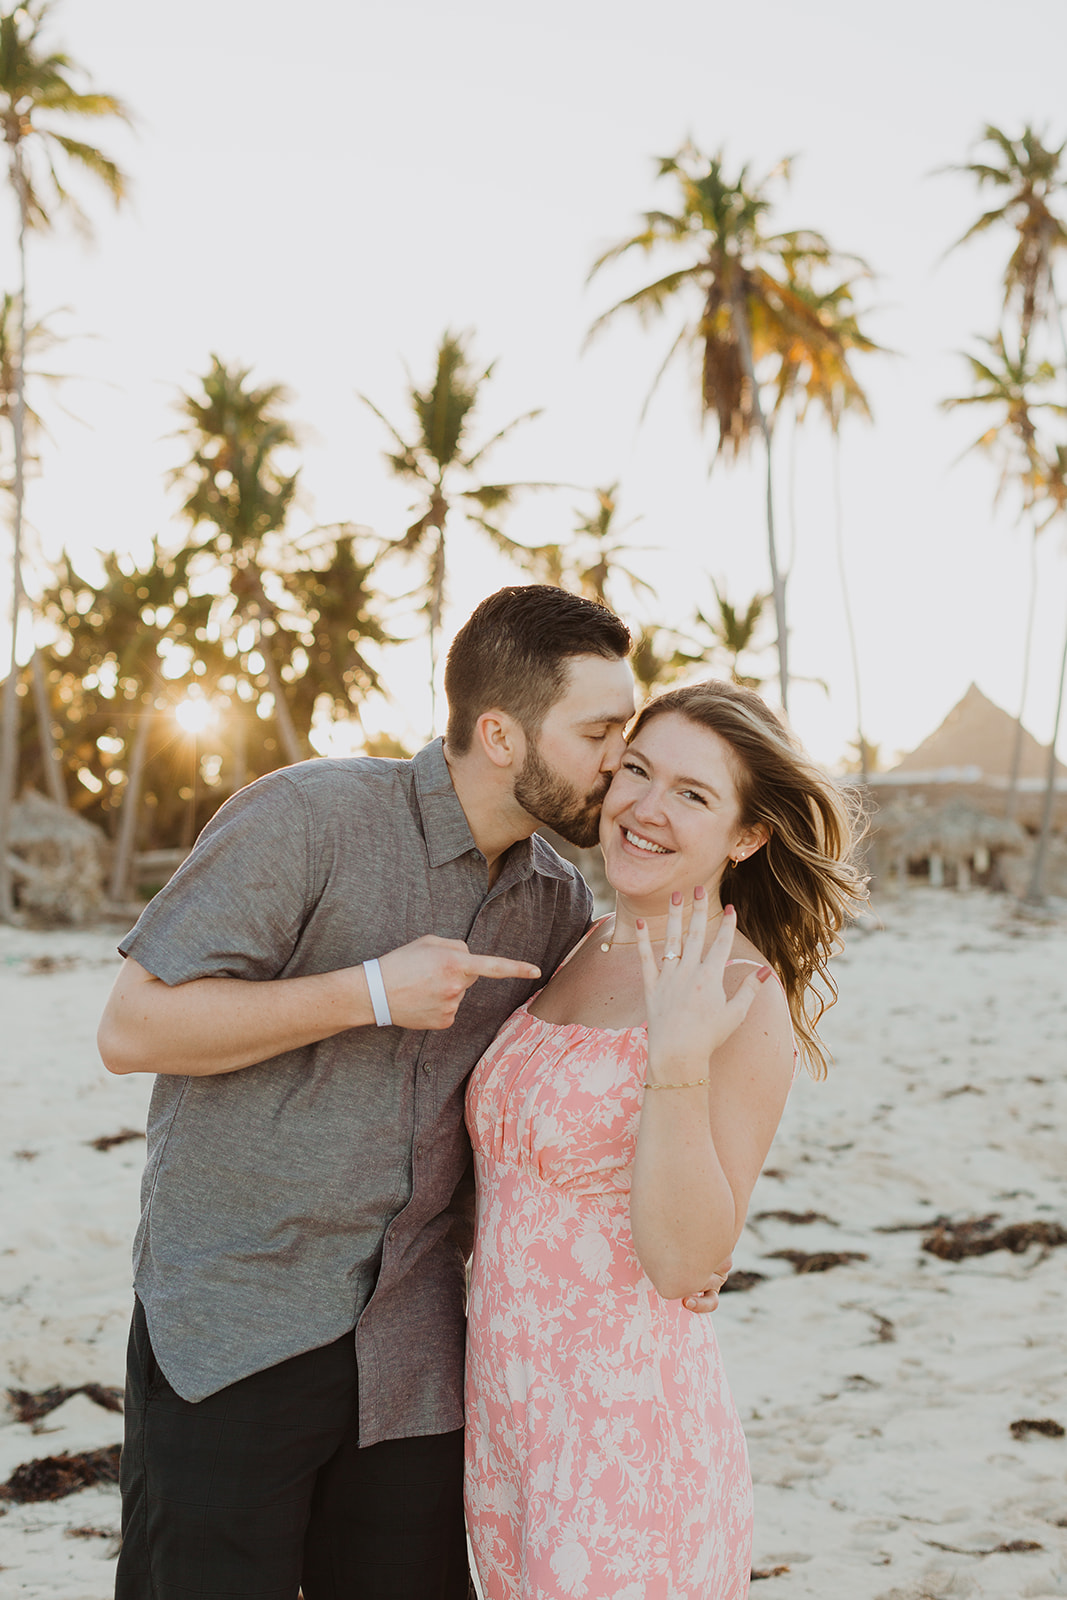 A freshly engaged couple on the beach at sunset in Punta Cana Dominican Republic